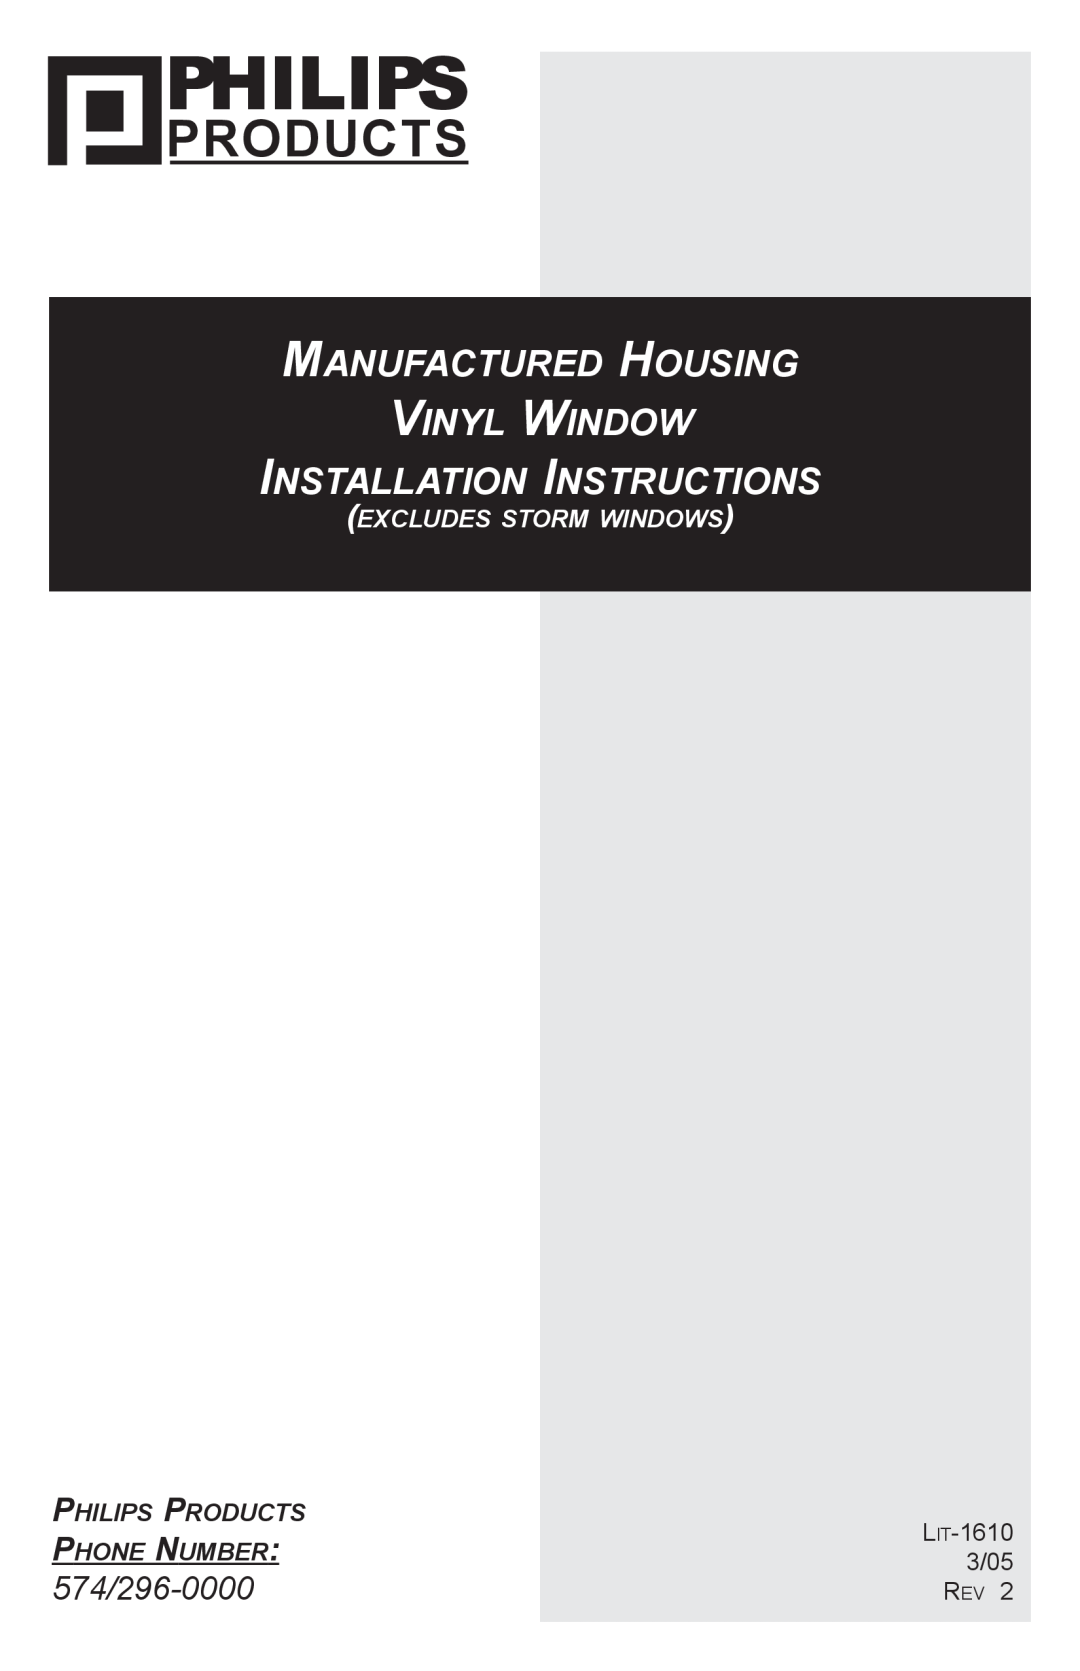 Philips Manufactured Housing Vinyl Window installation instructions 574/296-0000, Philips Products, LIT-1610, 3/05 